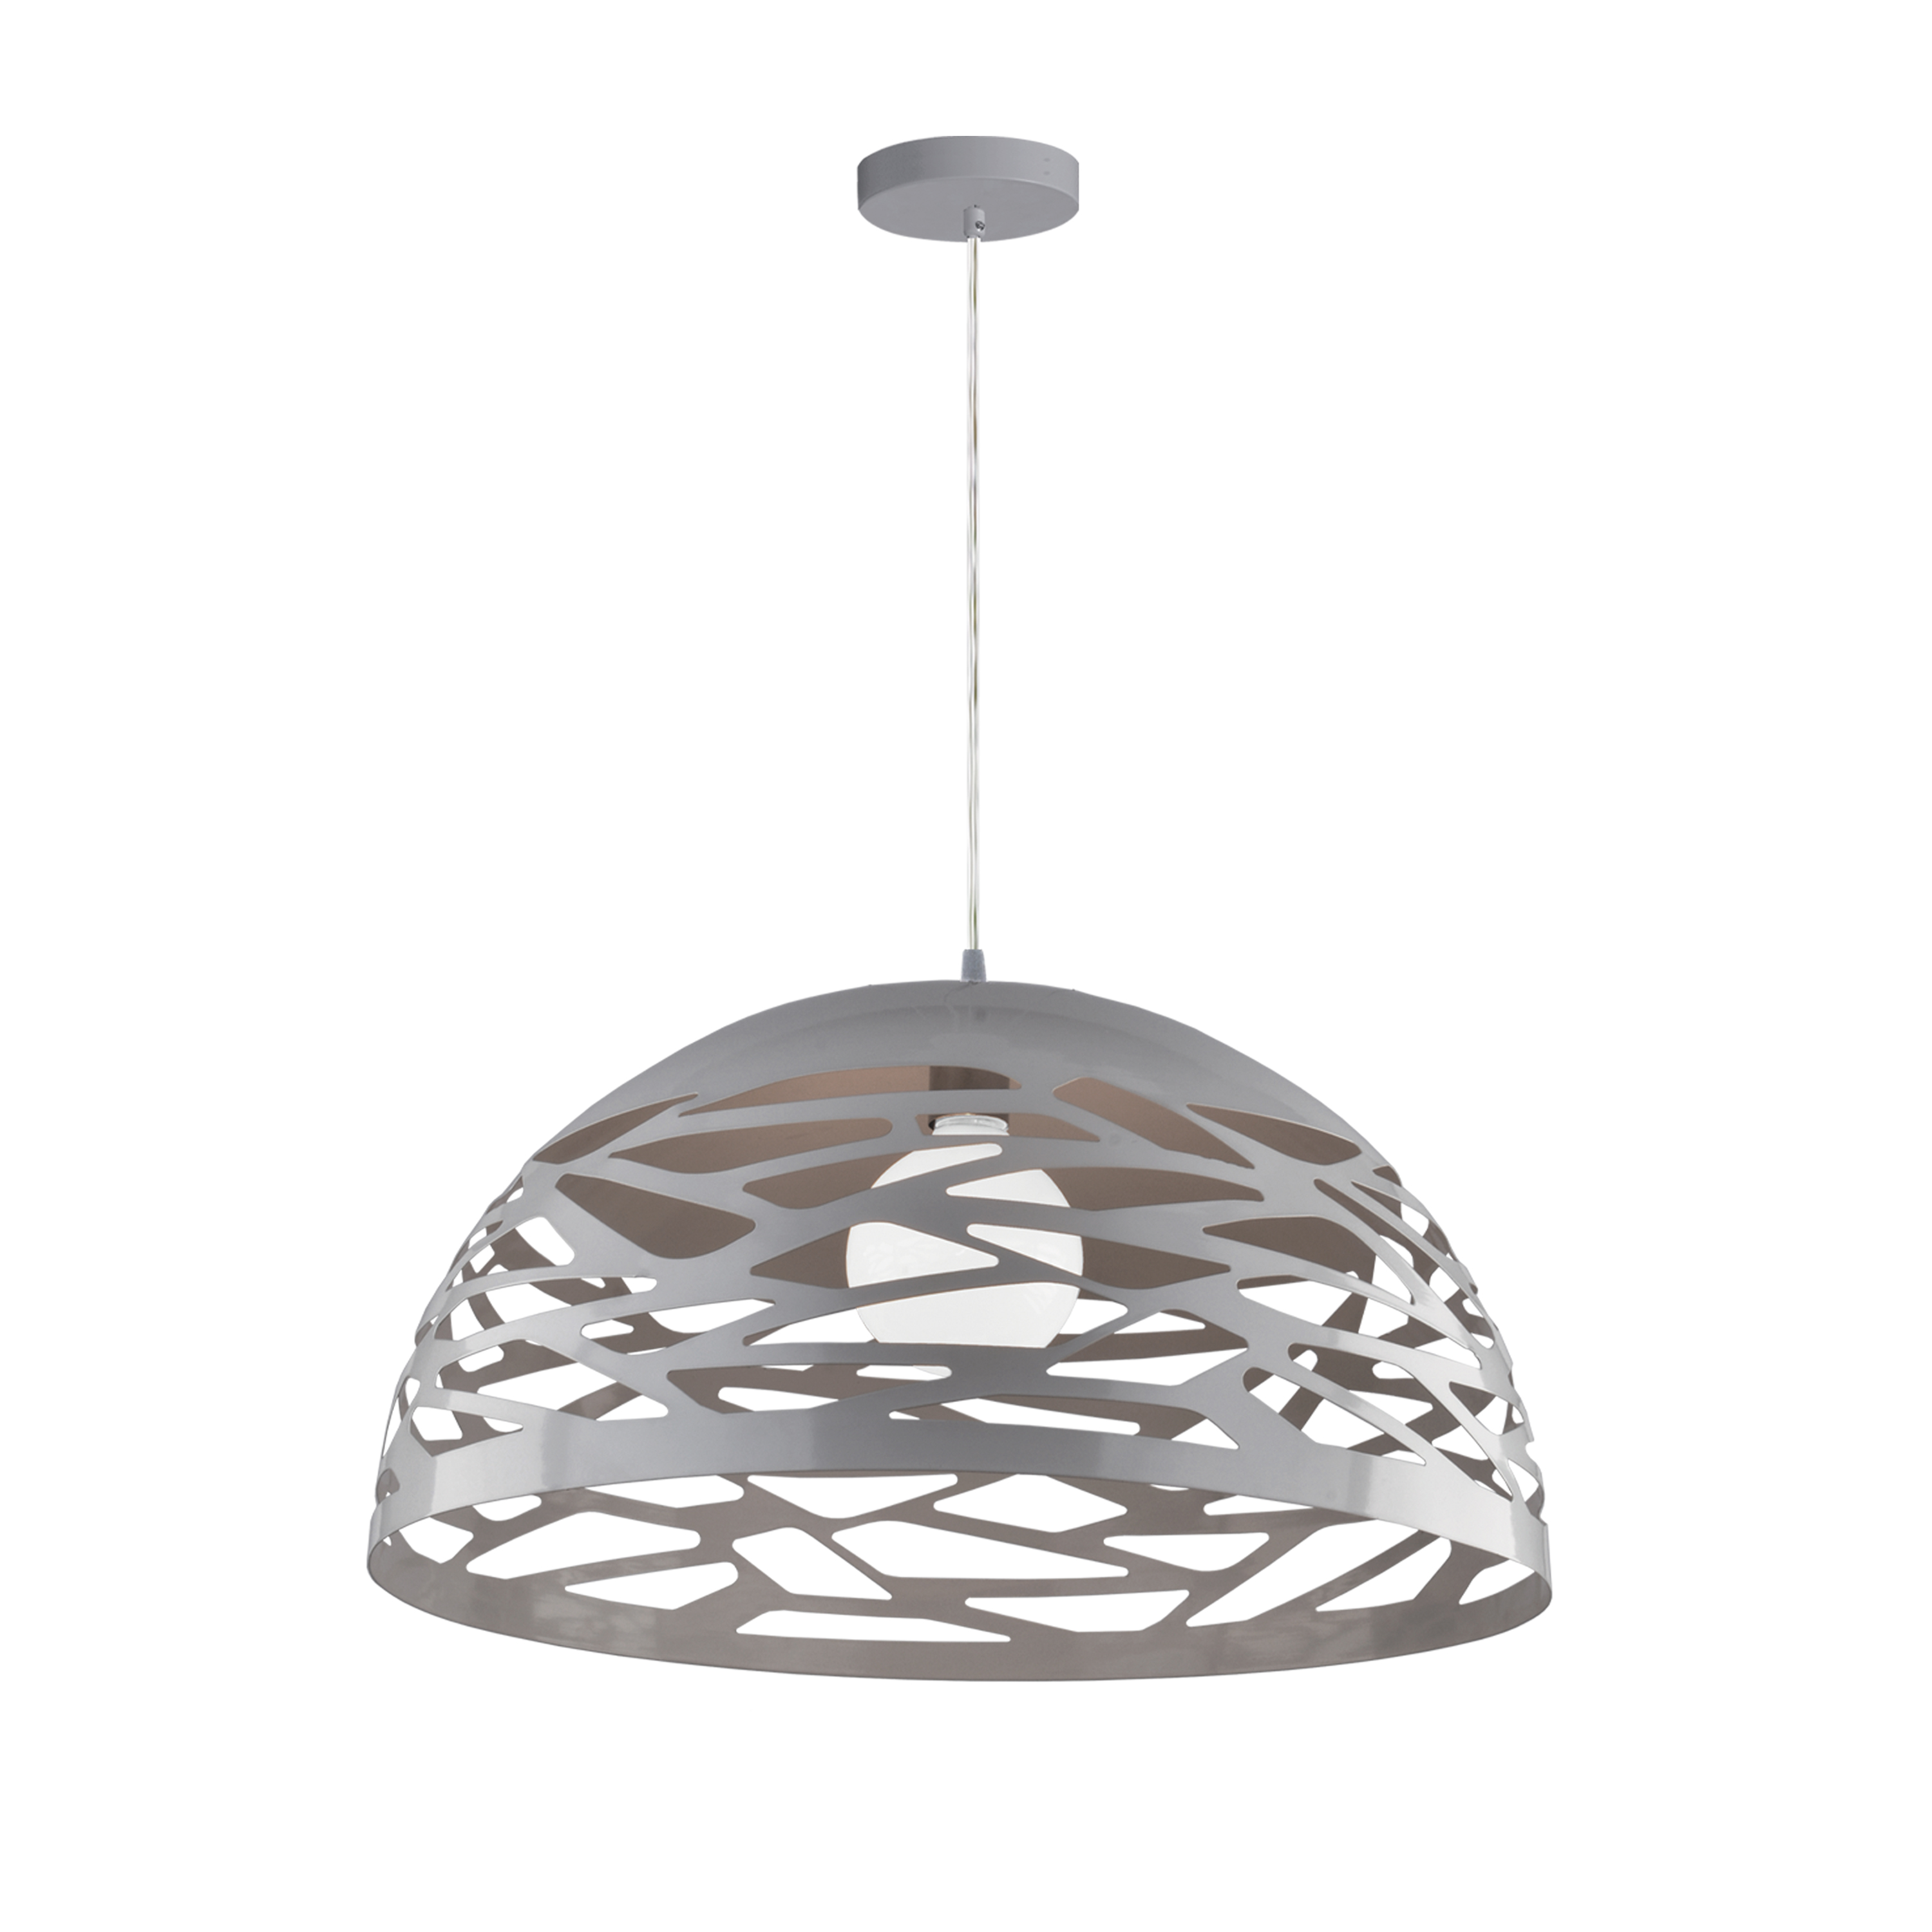 Artful in its design, and elegant in its effect, the Coral family of pendant lighting adds a graceful note to your home. The open pattern creates an eye-catching effect that adds a point of interest to modern and mid-century furnishings.  The metal frame drops to an inverted half globe, with an intriguing and irregular cut-out pattern inspired by the delightfully varied patterns of the coral reef. Clean, stylized lines give it a modern edge. Coral lighting adds textural interest to the smooth lines of a kitchen or dining area.